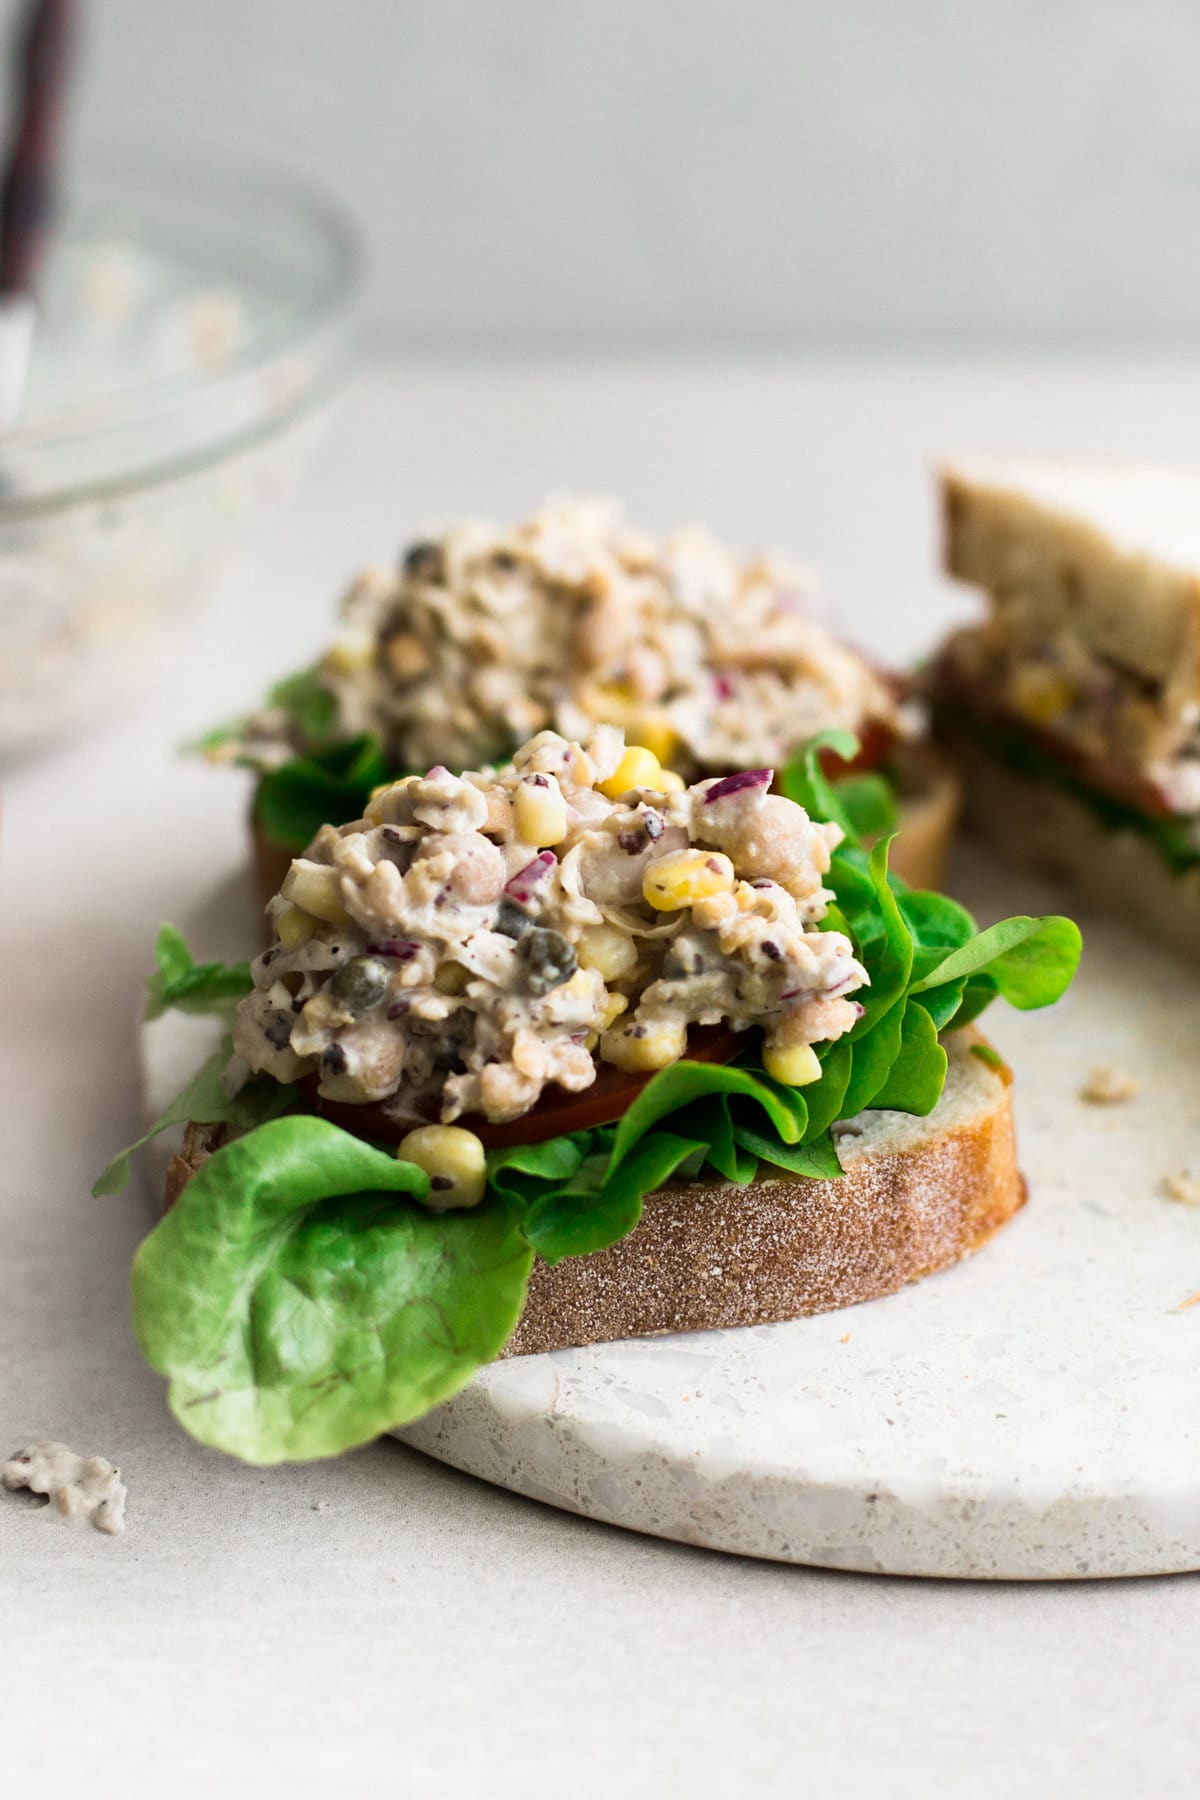 The Best Vegan Tuna Salad ever! Made with Chickpeas, Vegan Mayo, Dill, Capers, Onion and a secret ingredient! Ready in under 10 minutes. #tunasalad #plantbased #chickpeas #sandwich #healthy #vegetarian #tunamayo #tunasandwich #fauxtuna